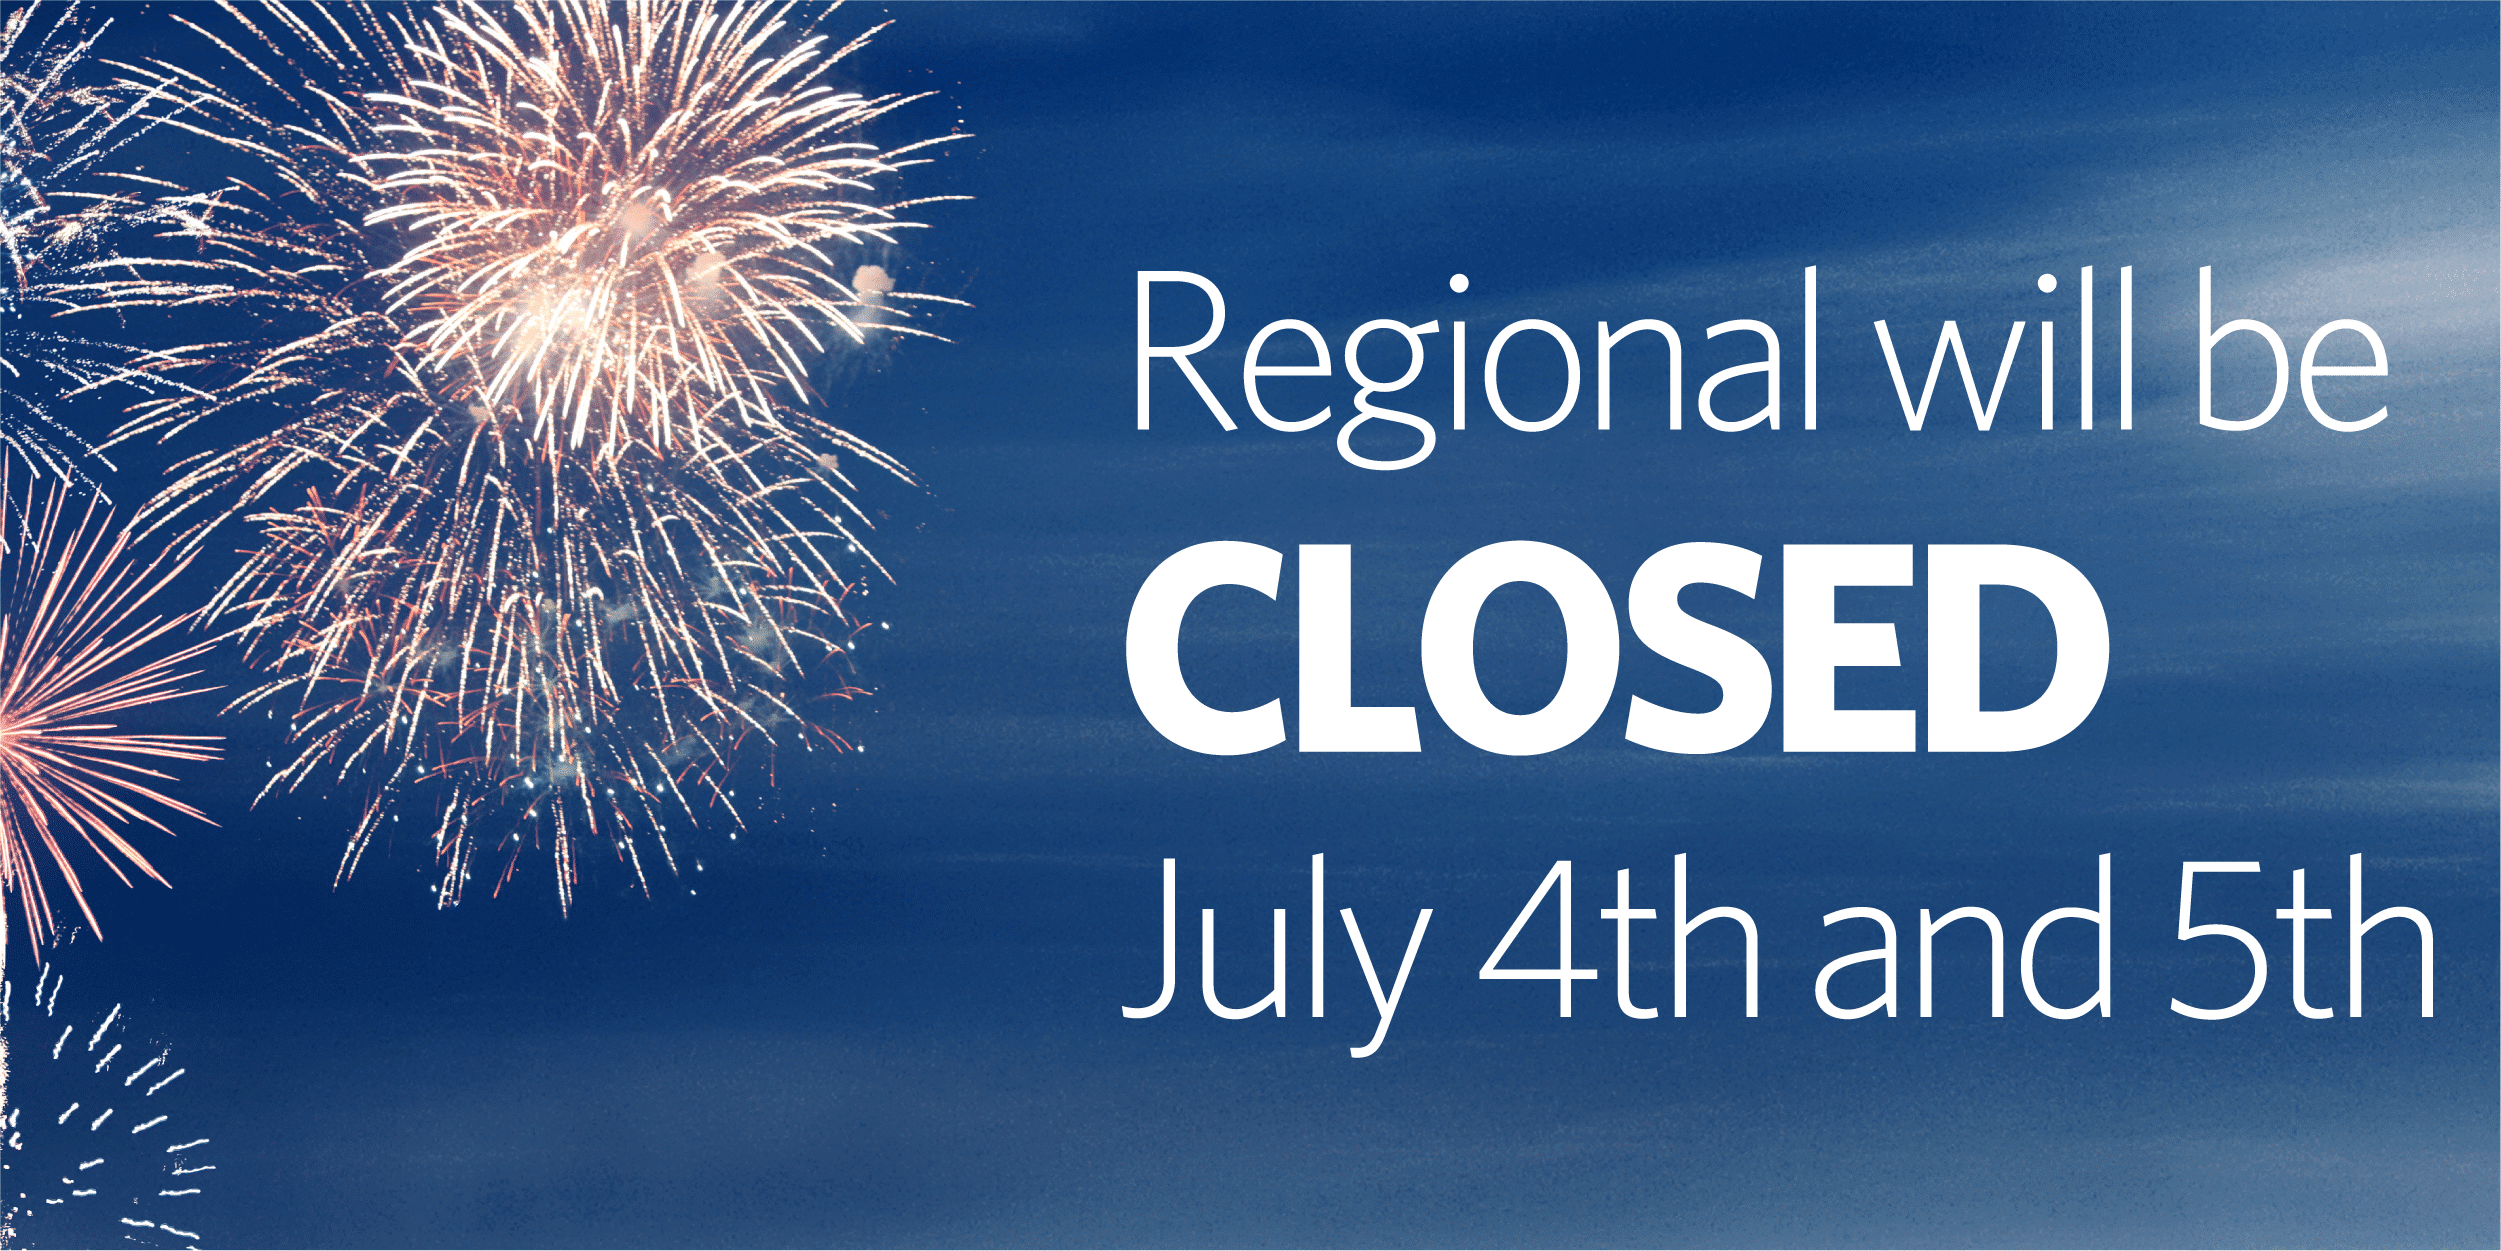 You are currently viewing Regional Access will be CLOSED Thursday July 4th and Friday July 5th